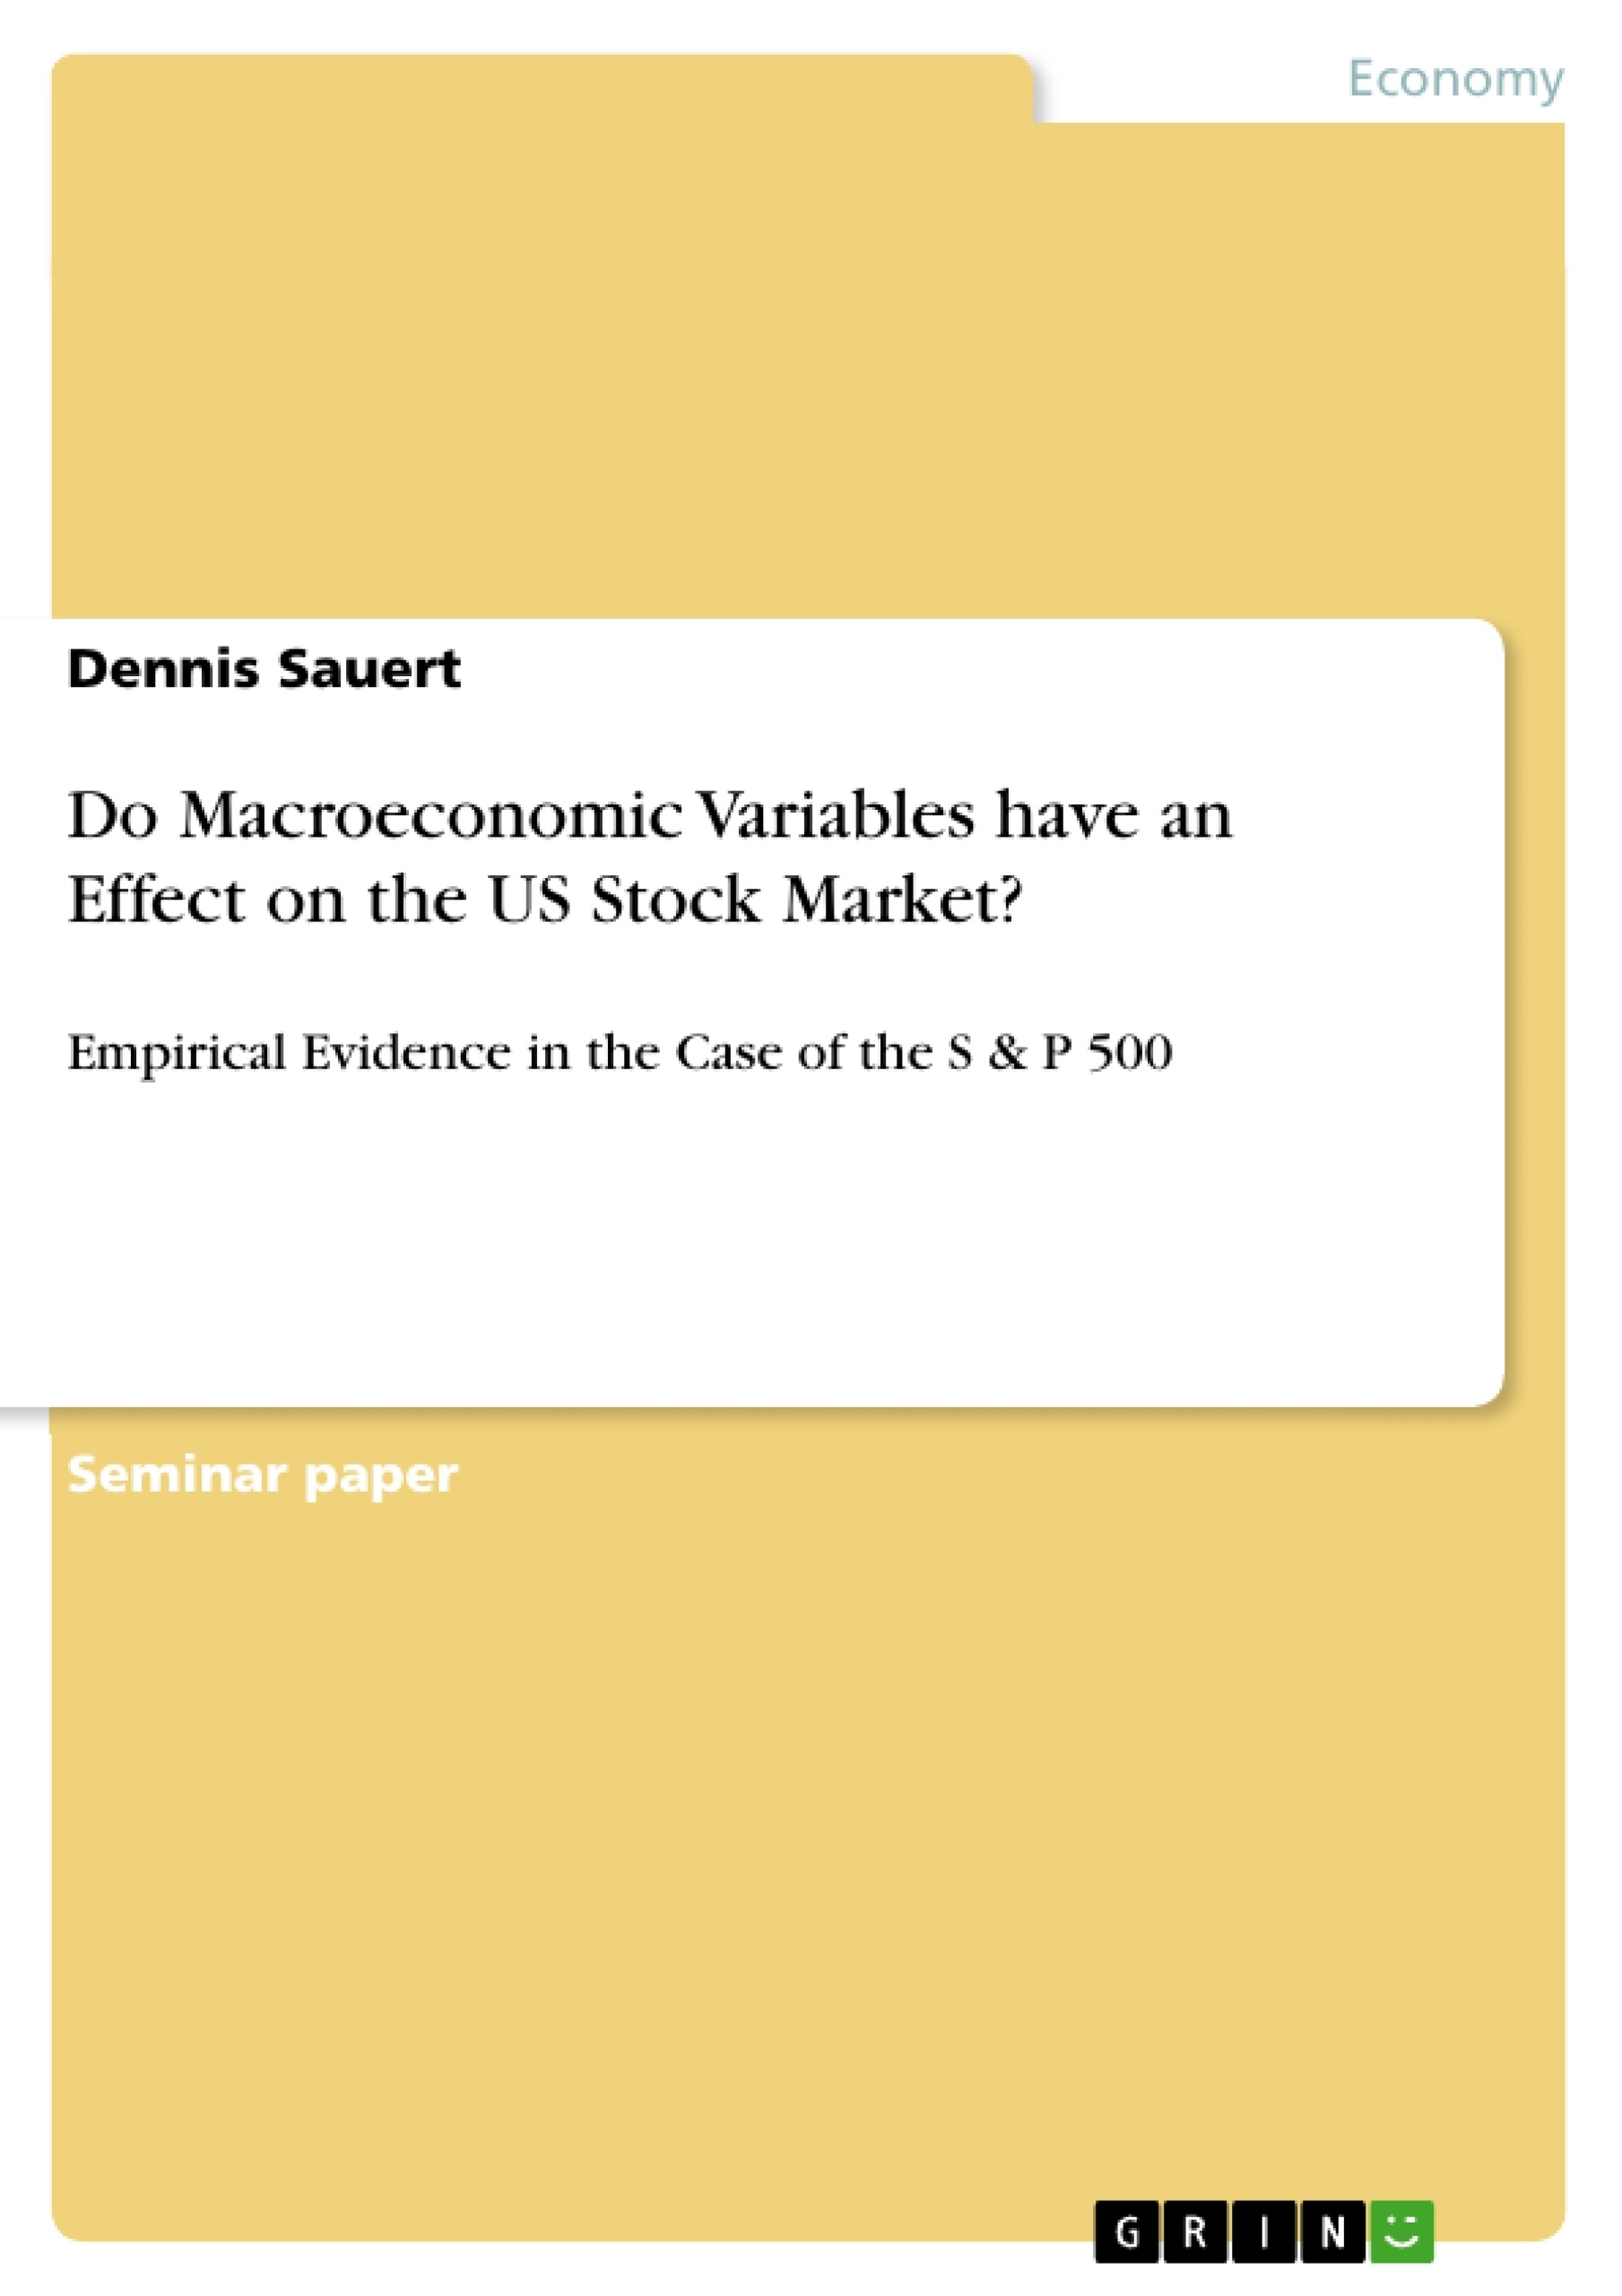 Título: Do Macroeconomic Variables have an Effect on the US Stock Market?